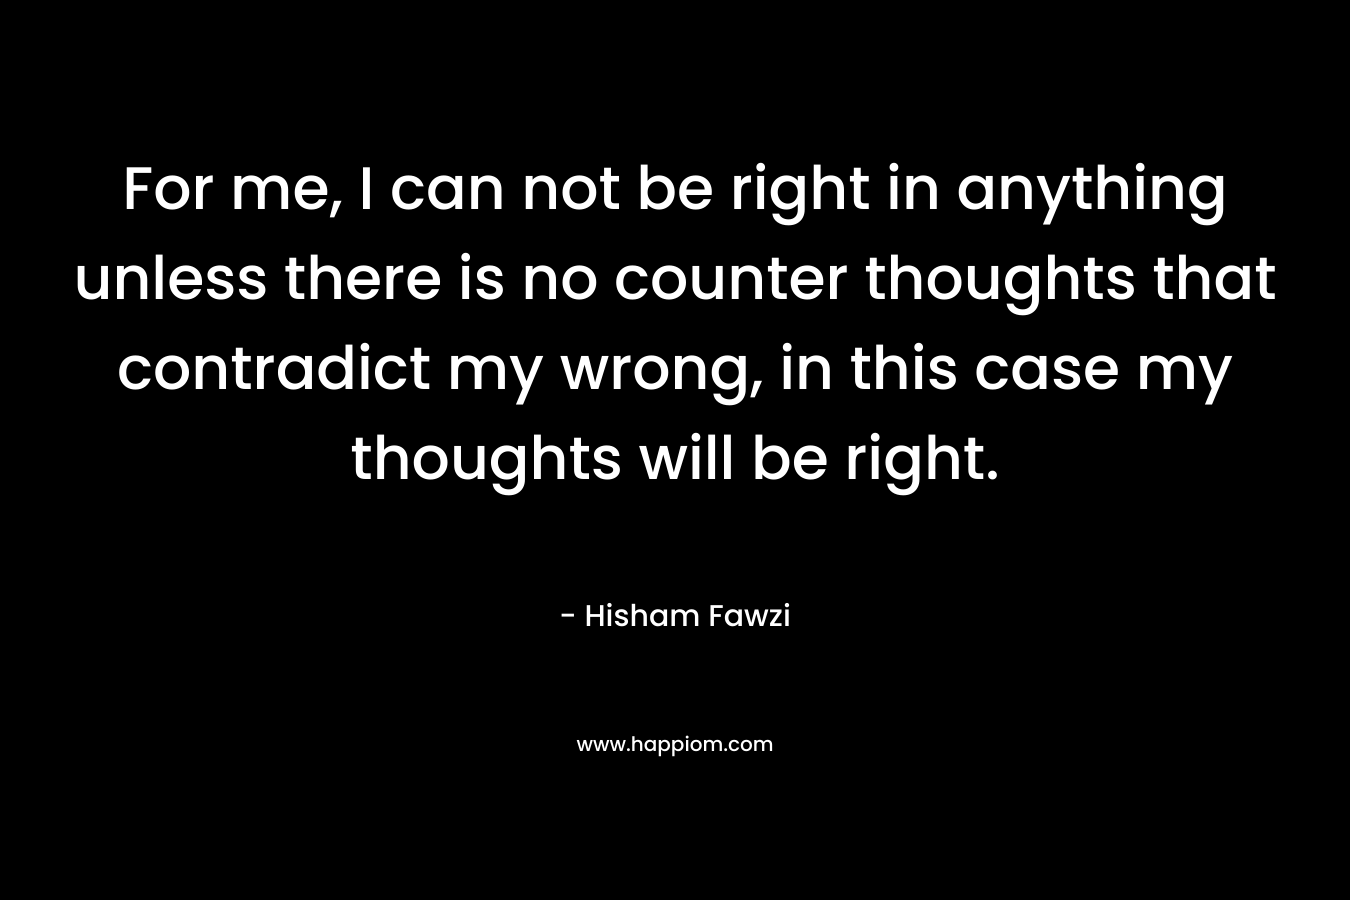 For me, I can not be right in anything unless there is no counter thoughts that contradict my wrong, in this case my thoughts will be right. – Hisham Fawzi